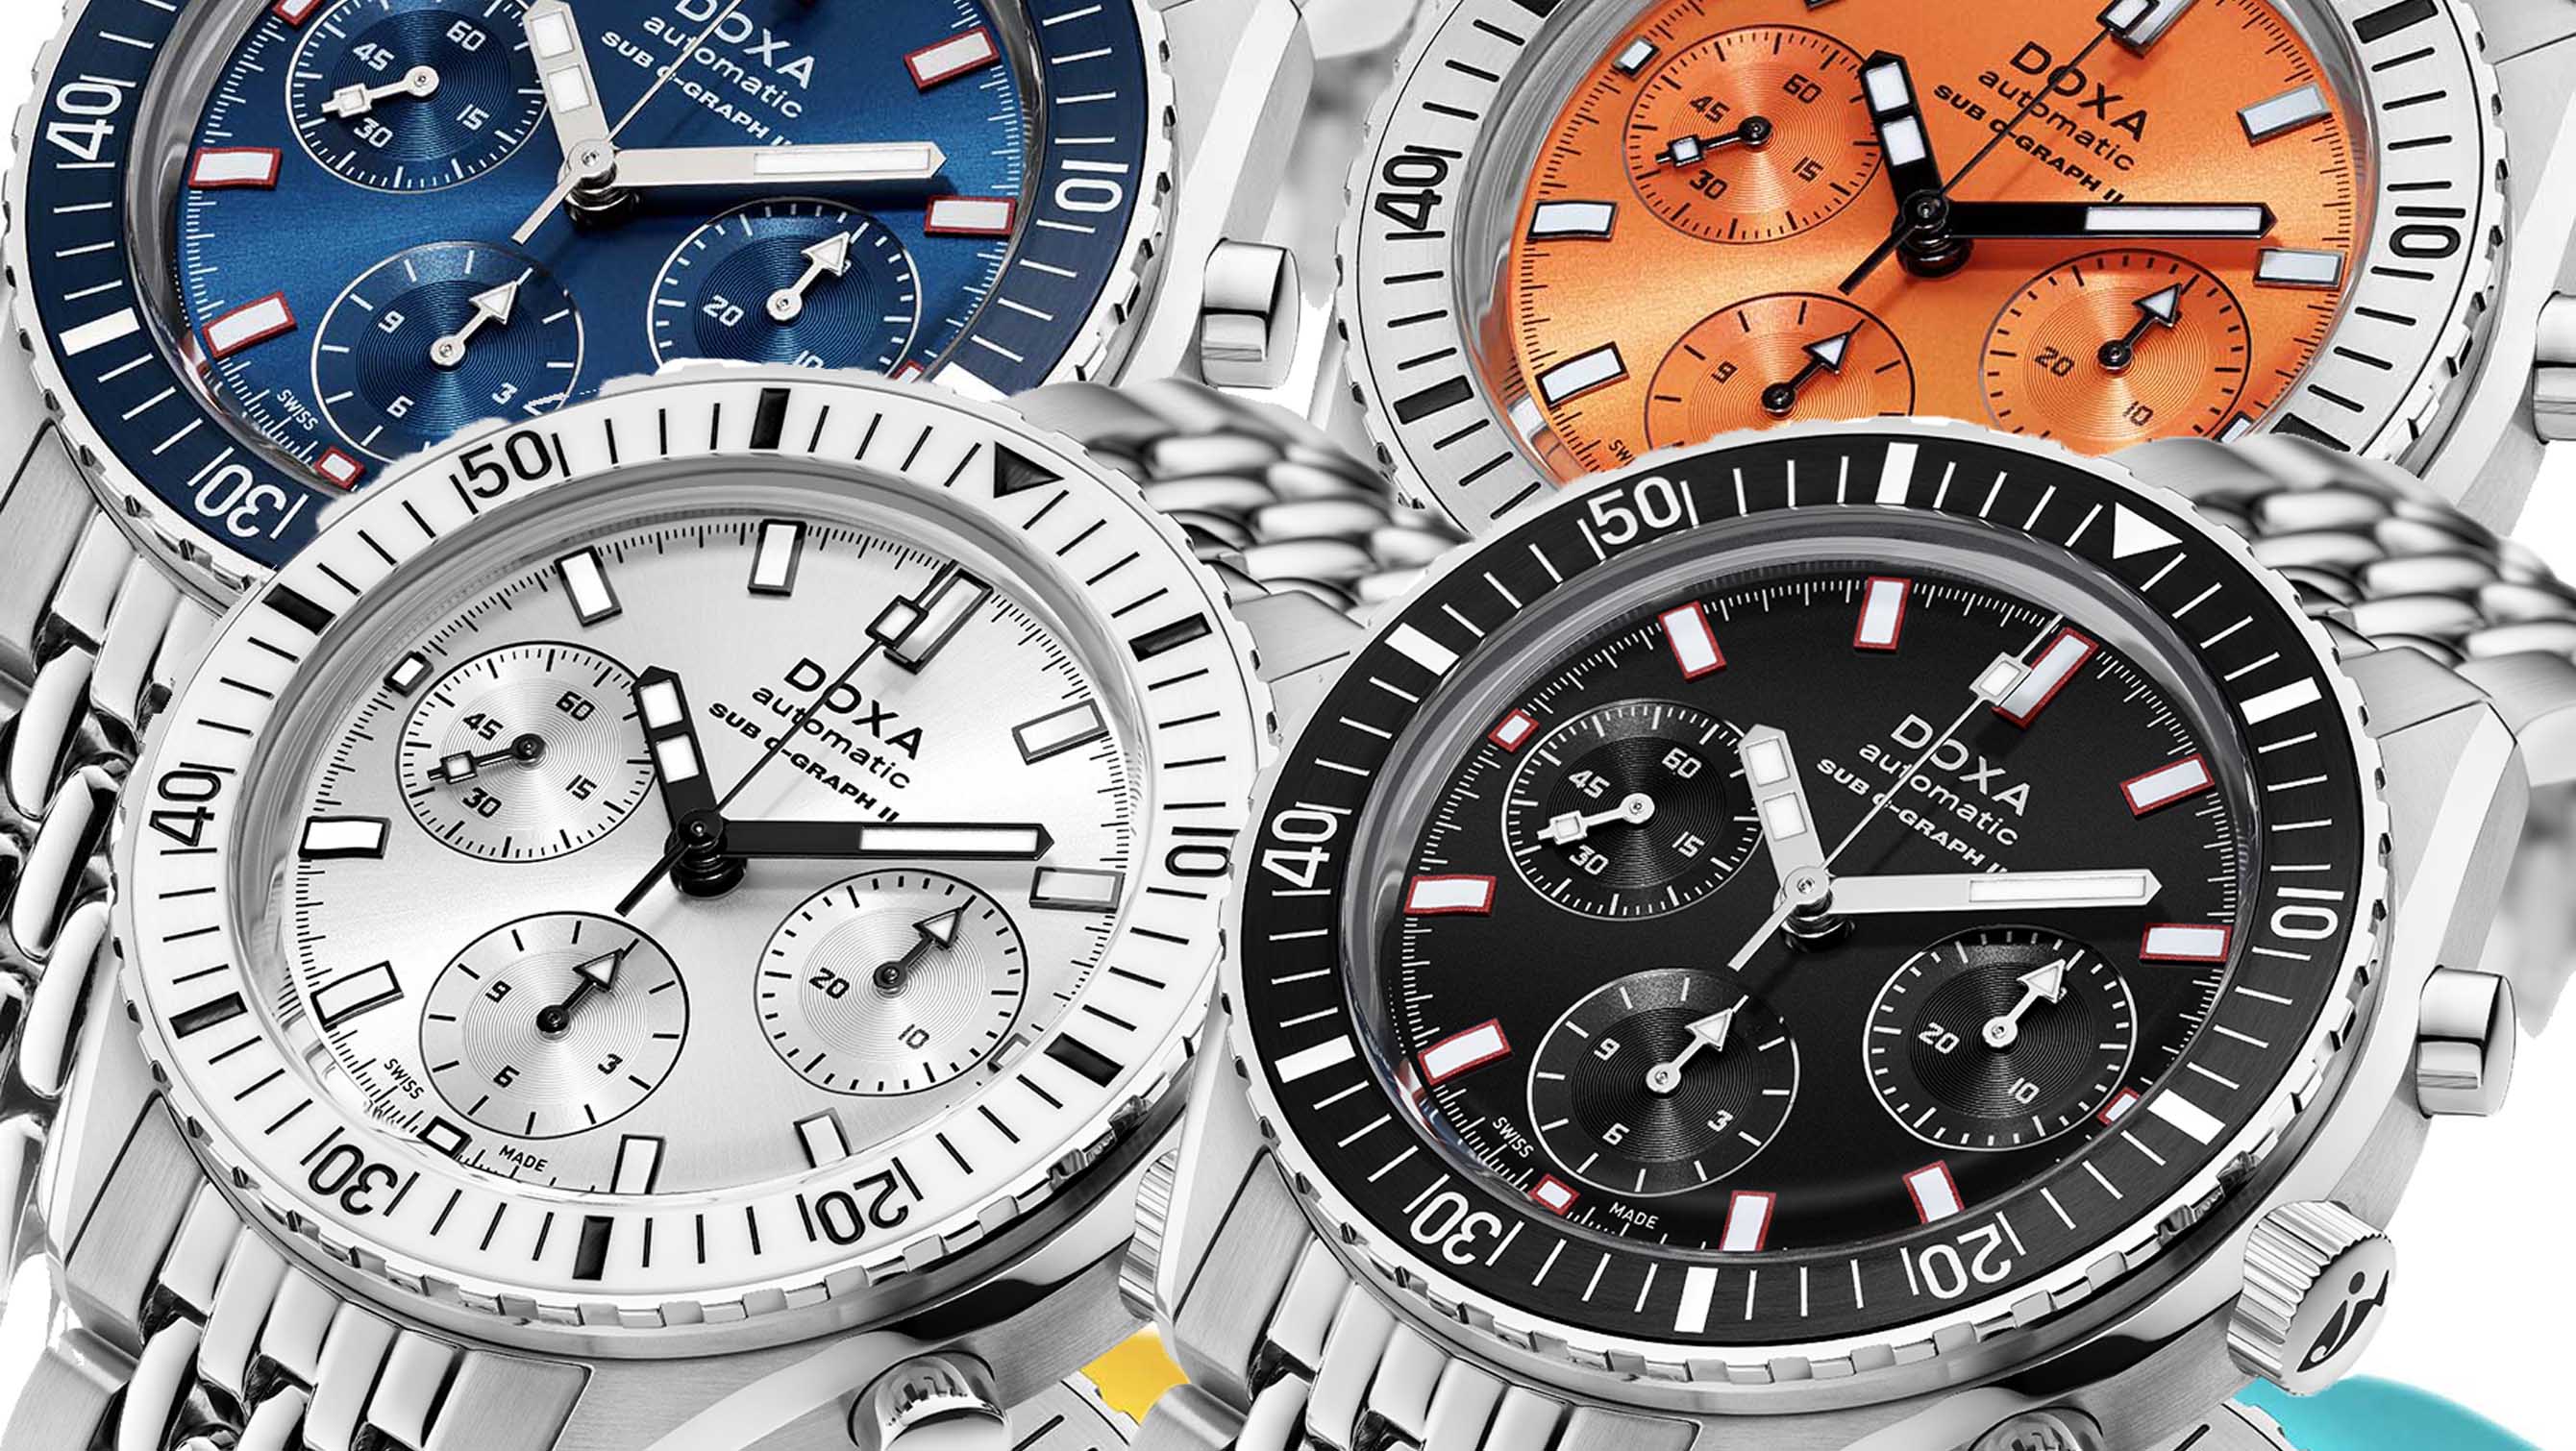 INTRODUCING: The DOXA SUB 200 C-GRAPH II is more compact and more colourful than ever